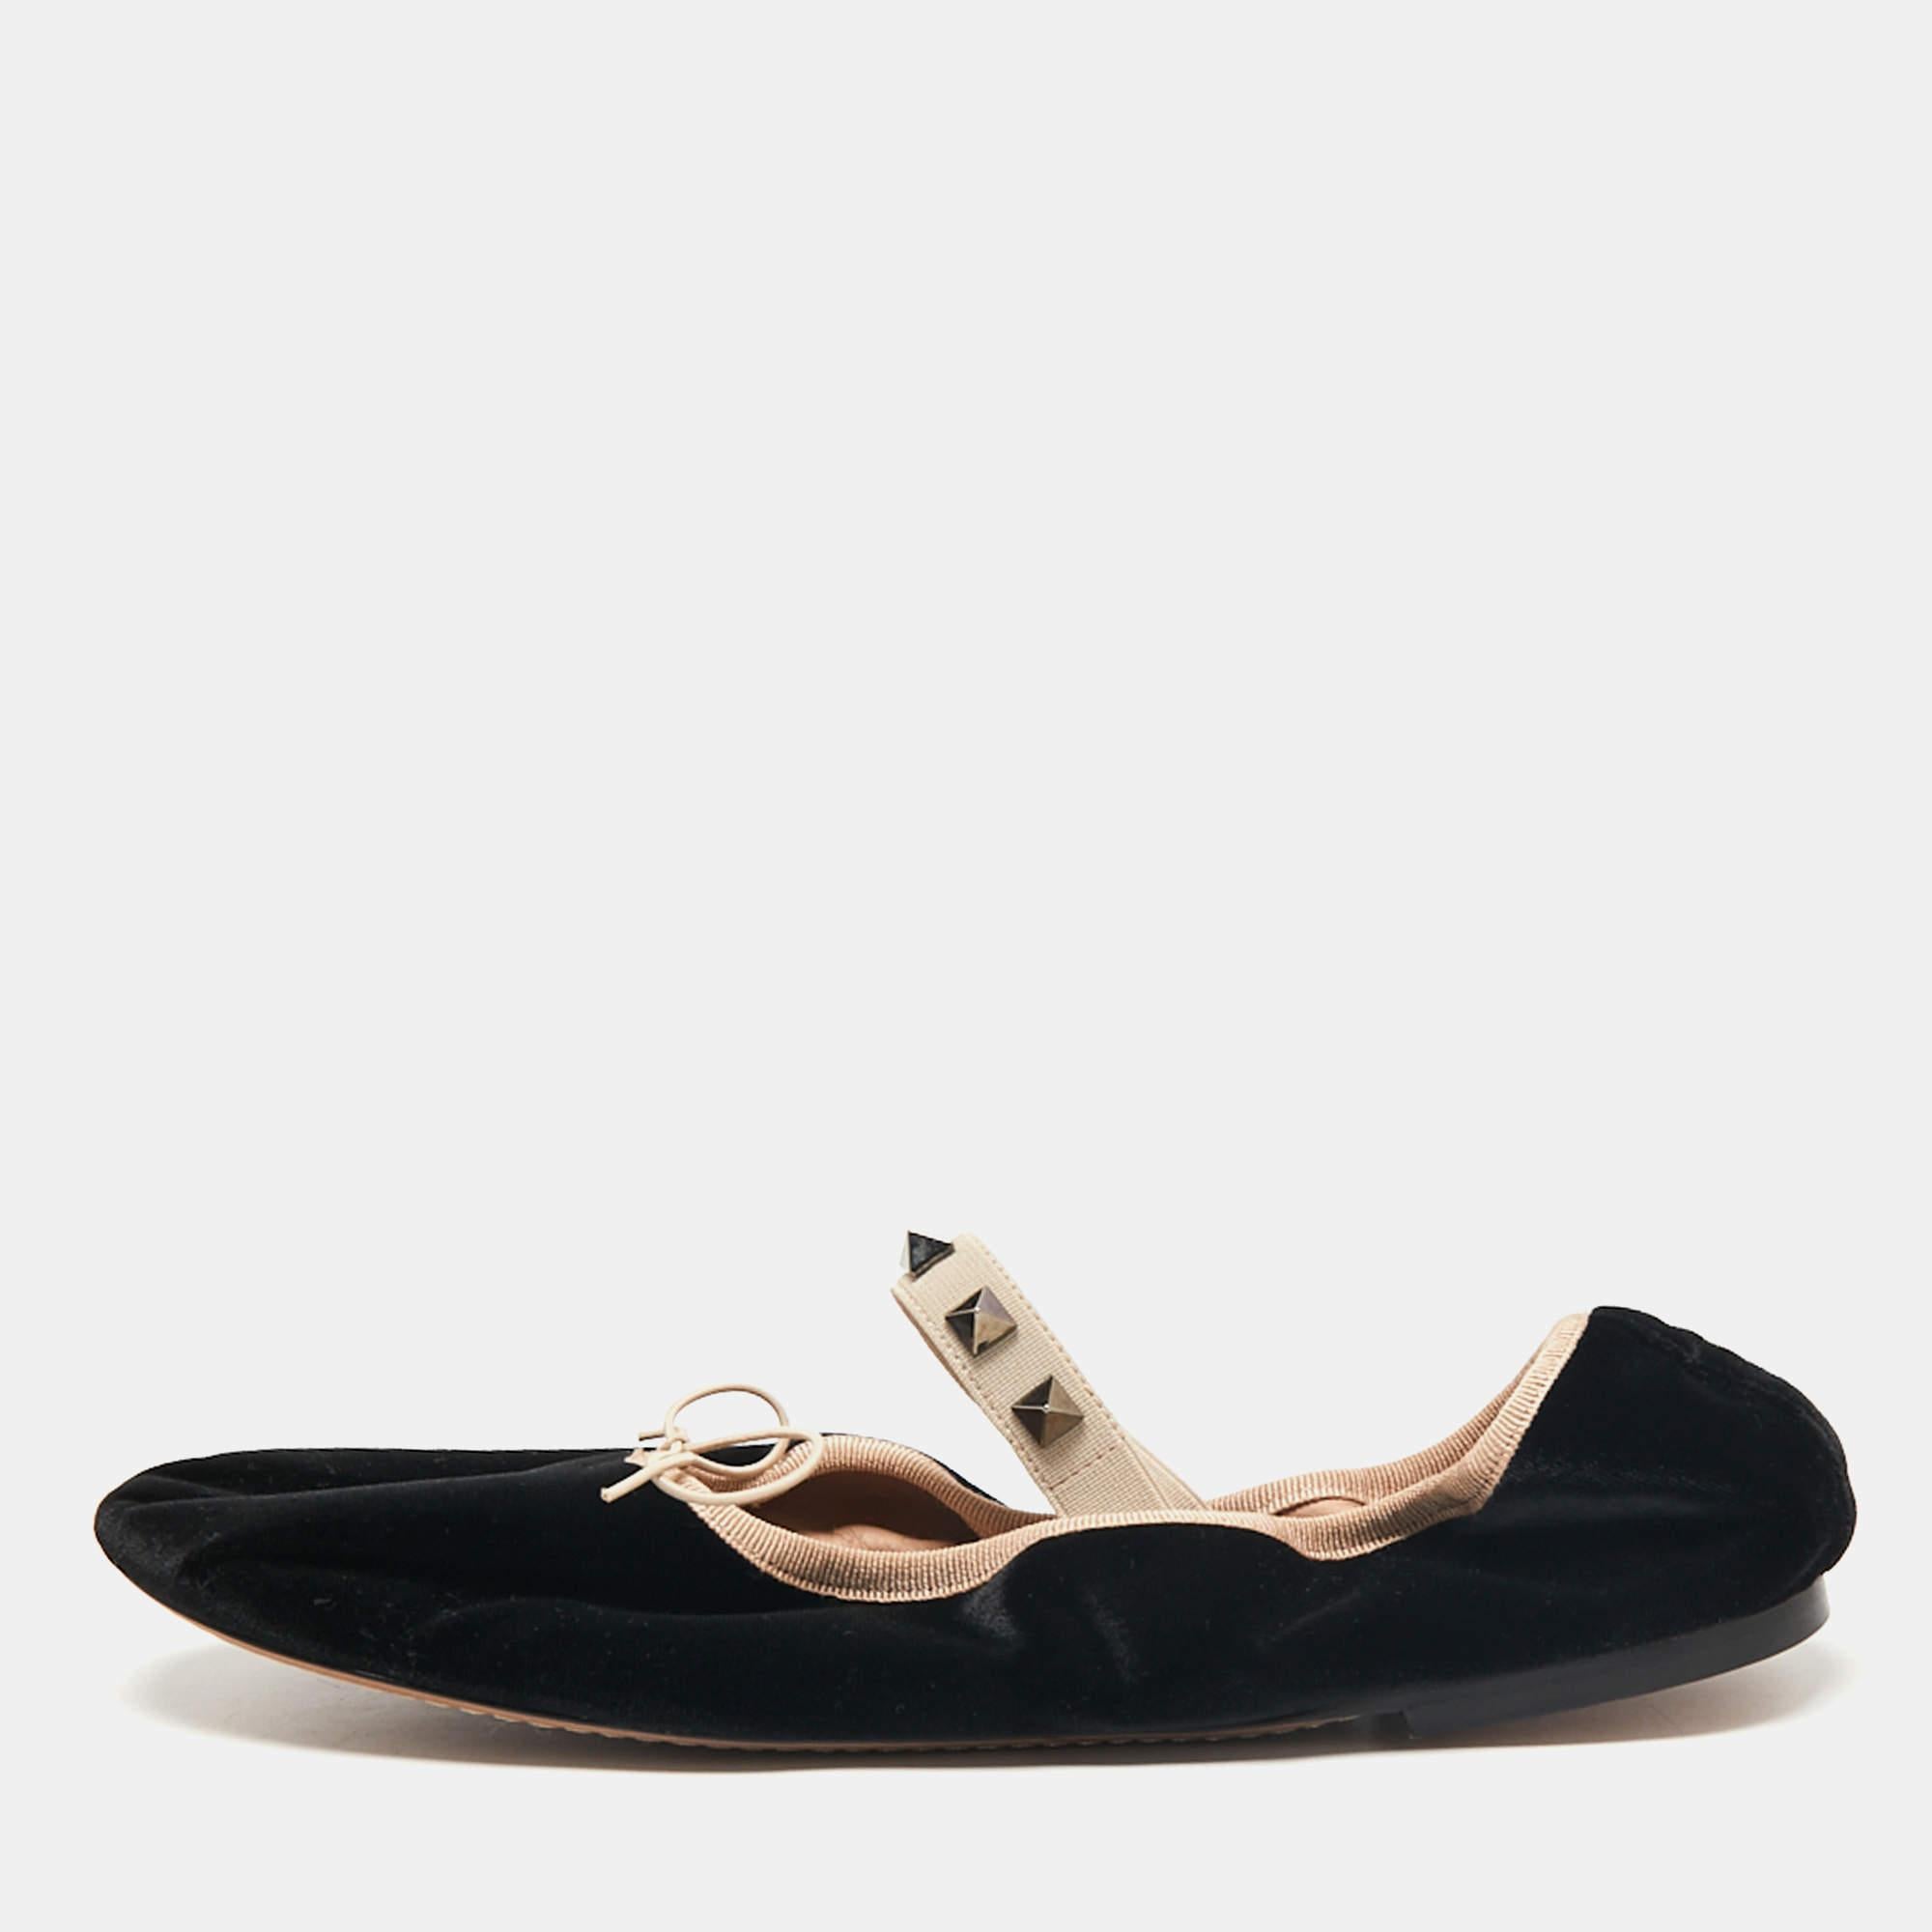 Valentino brings luxury and refined elegance to your style with these Mary Jane ballet flats. Crafted using black velvet, these ballet flats are embellished with the signature Rockstud accents, gunmetal-tone hardware, and contrast trims. These